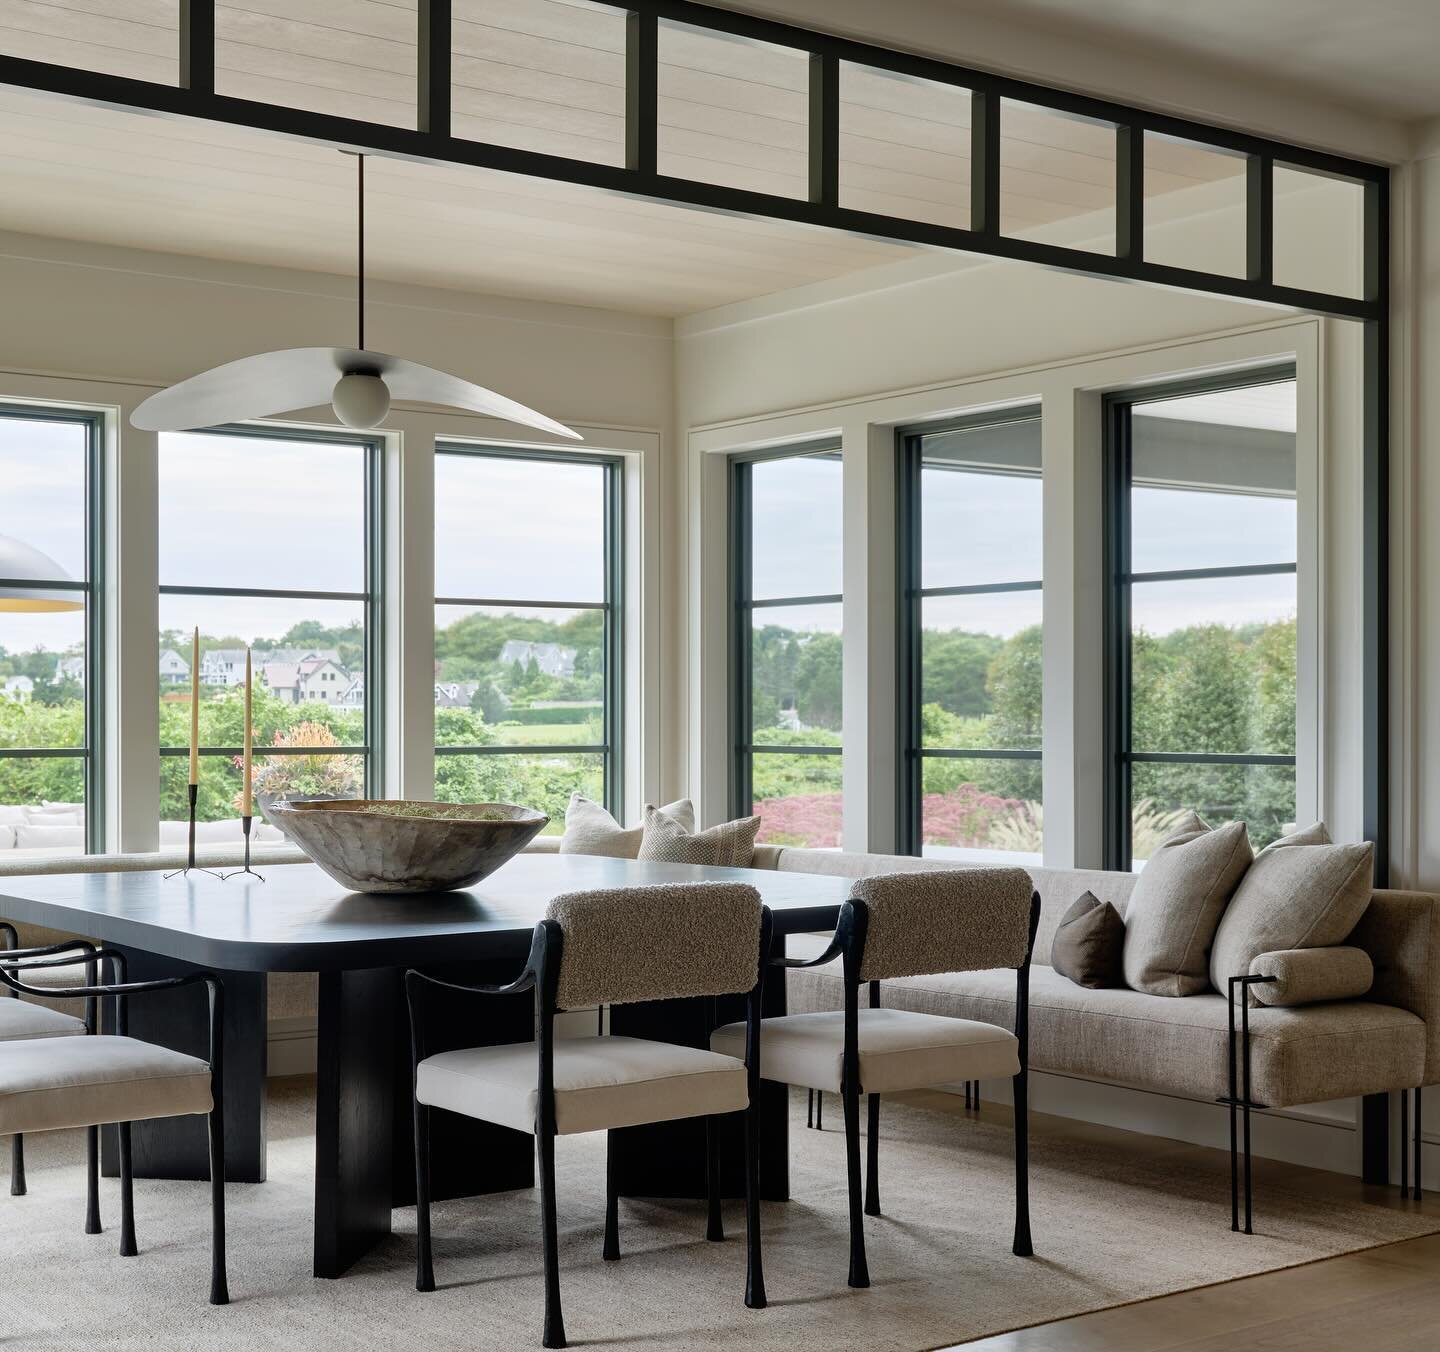 Interior transoms and ceiling treatments are great tools in defining certain living spaces, especially in an otherwise open floor plan. This dining area at our Cove House project still feels like an extension of the great room, while emulating a cozy